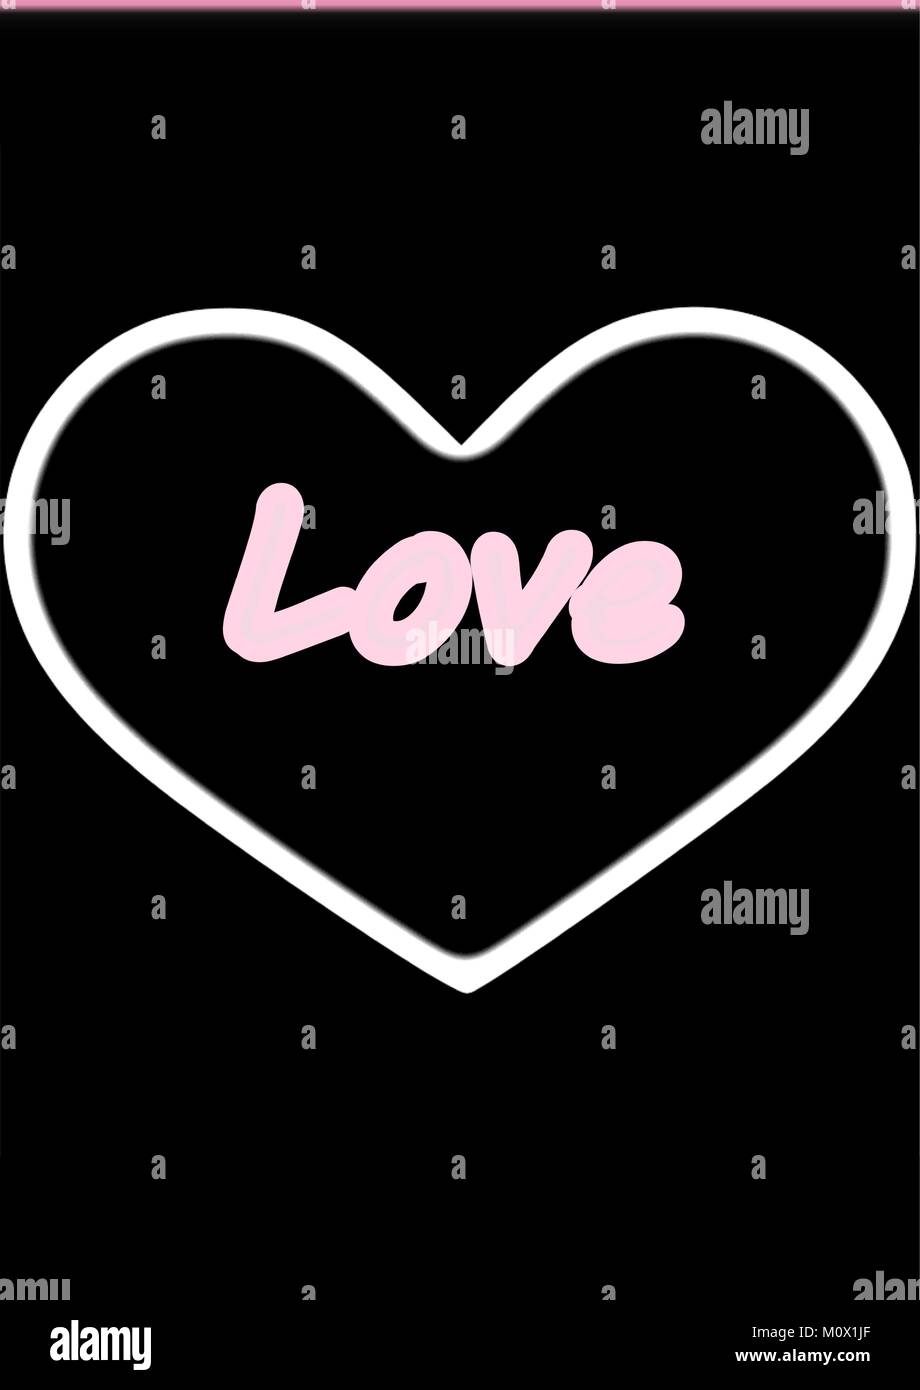 White Heart With The Word 'Love' In Pink Writing On A Black Background Stock Vector